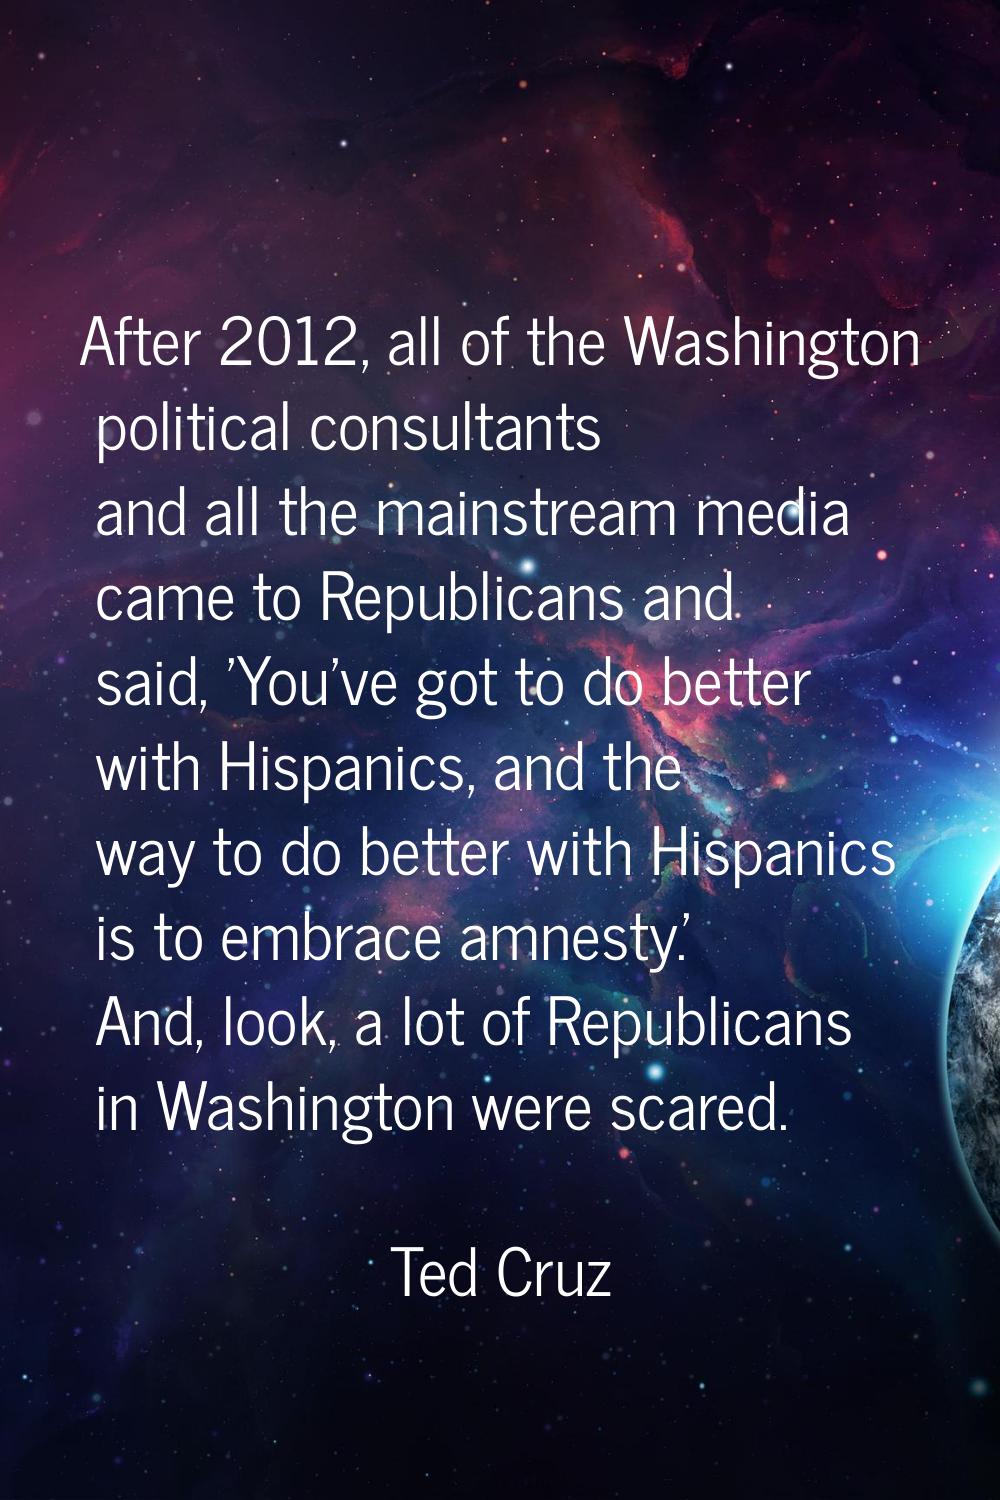 After 2012, all of the Washington political consultants and all the mainstream media came to Republ